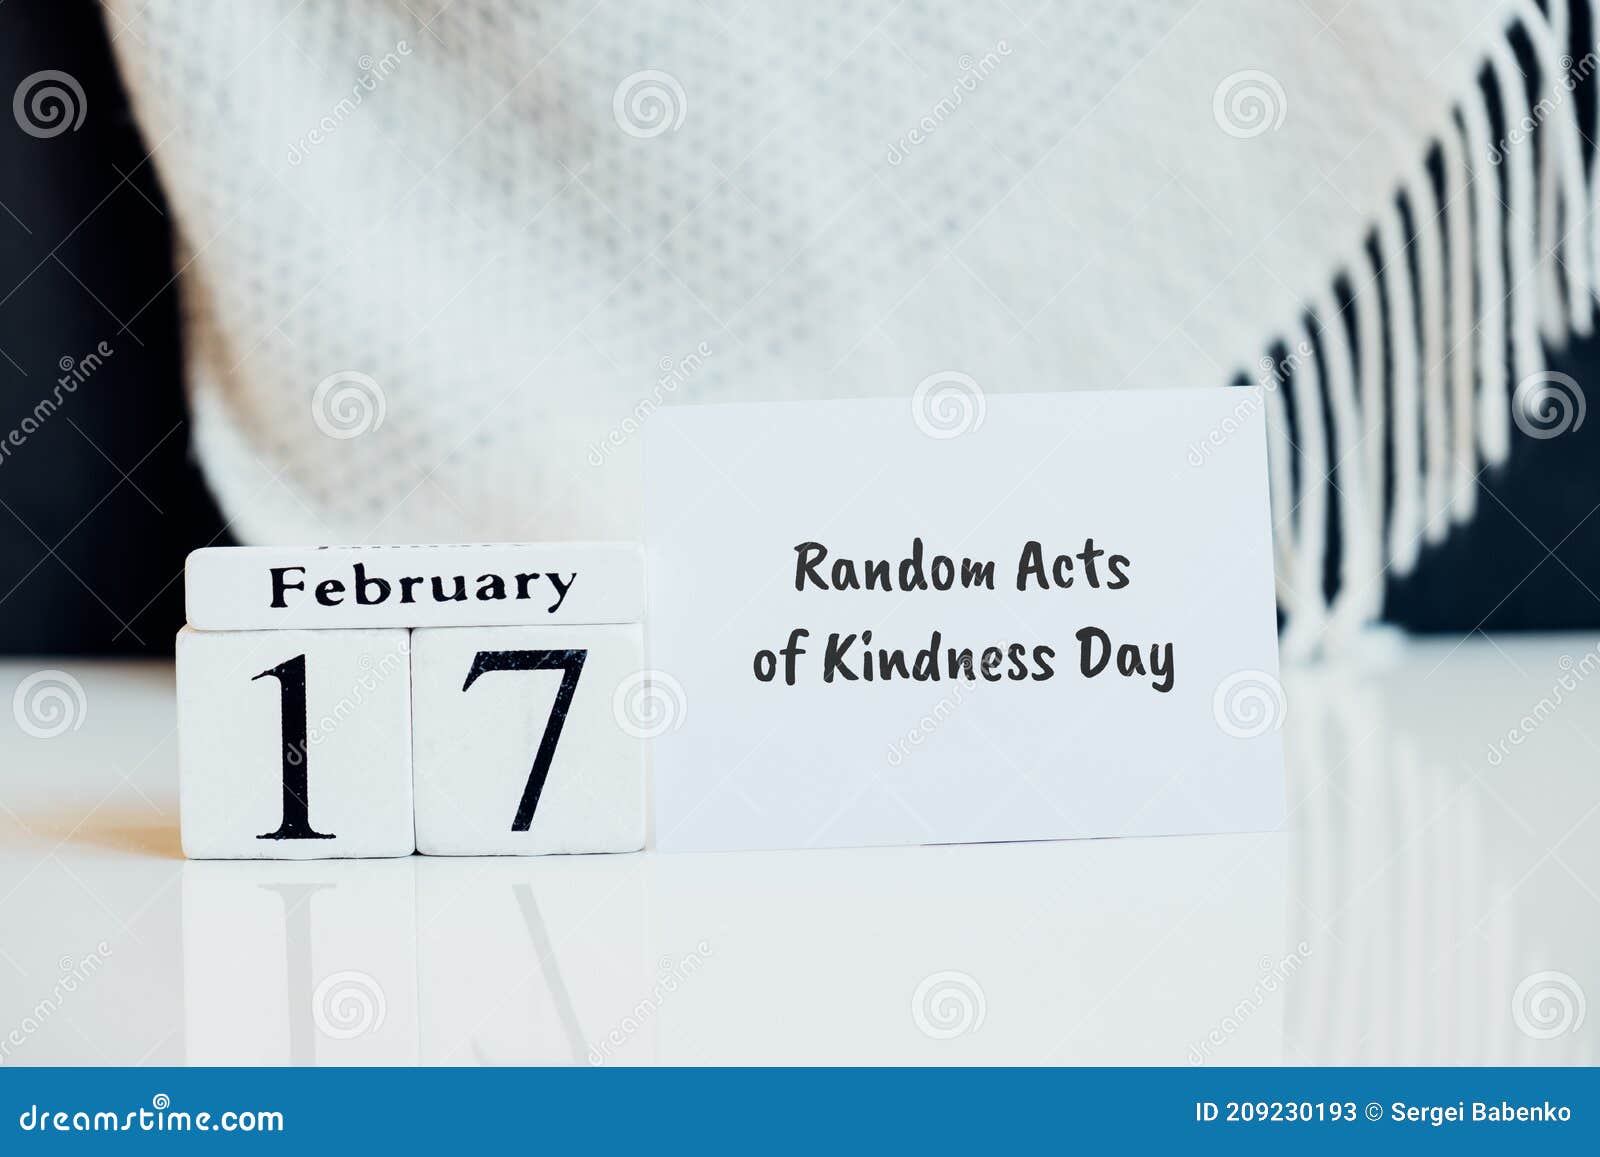 random acts of kindness day of winter month calendar february